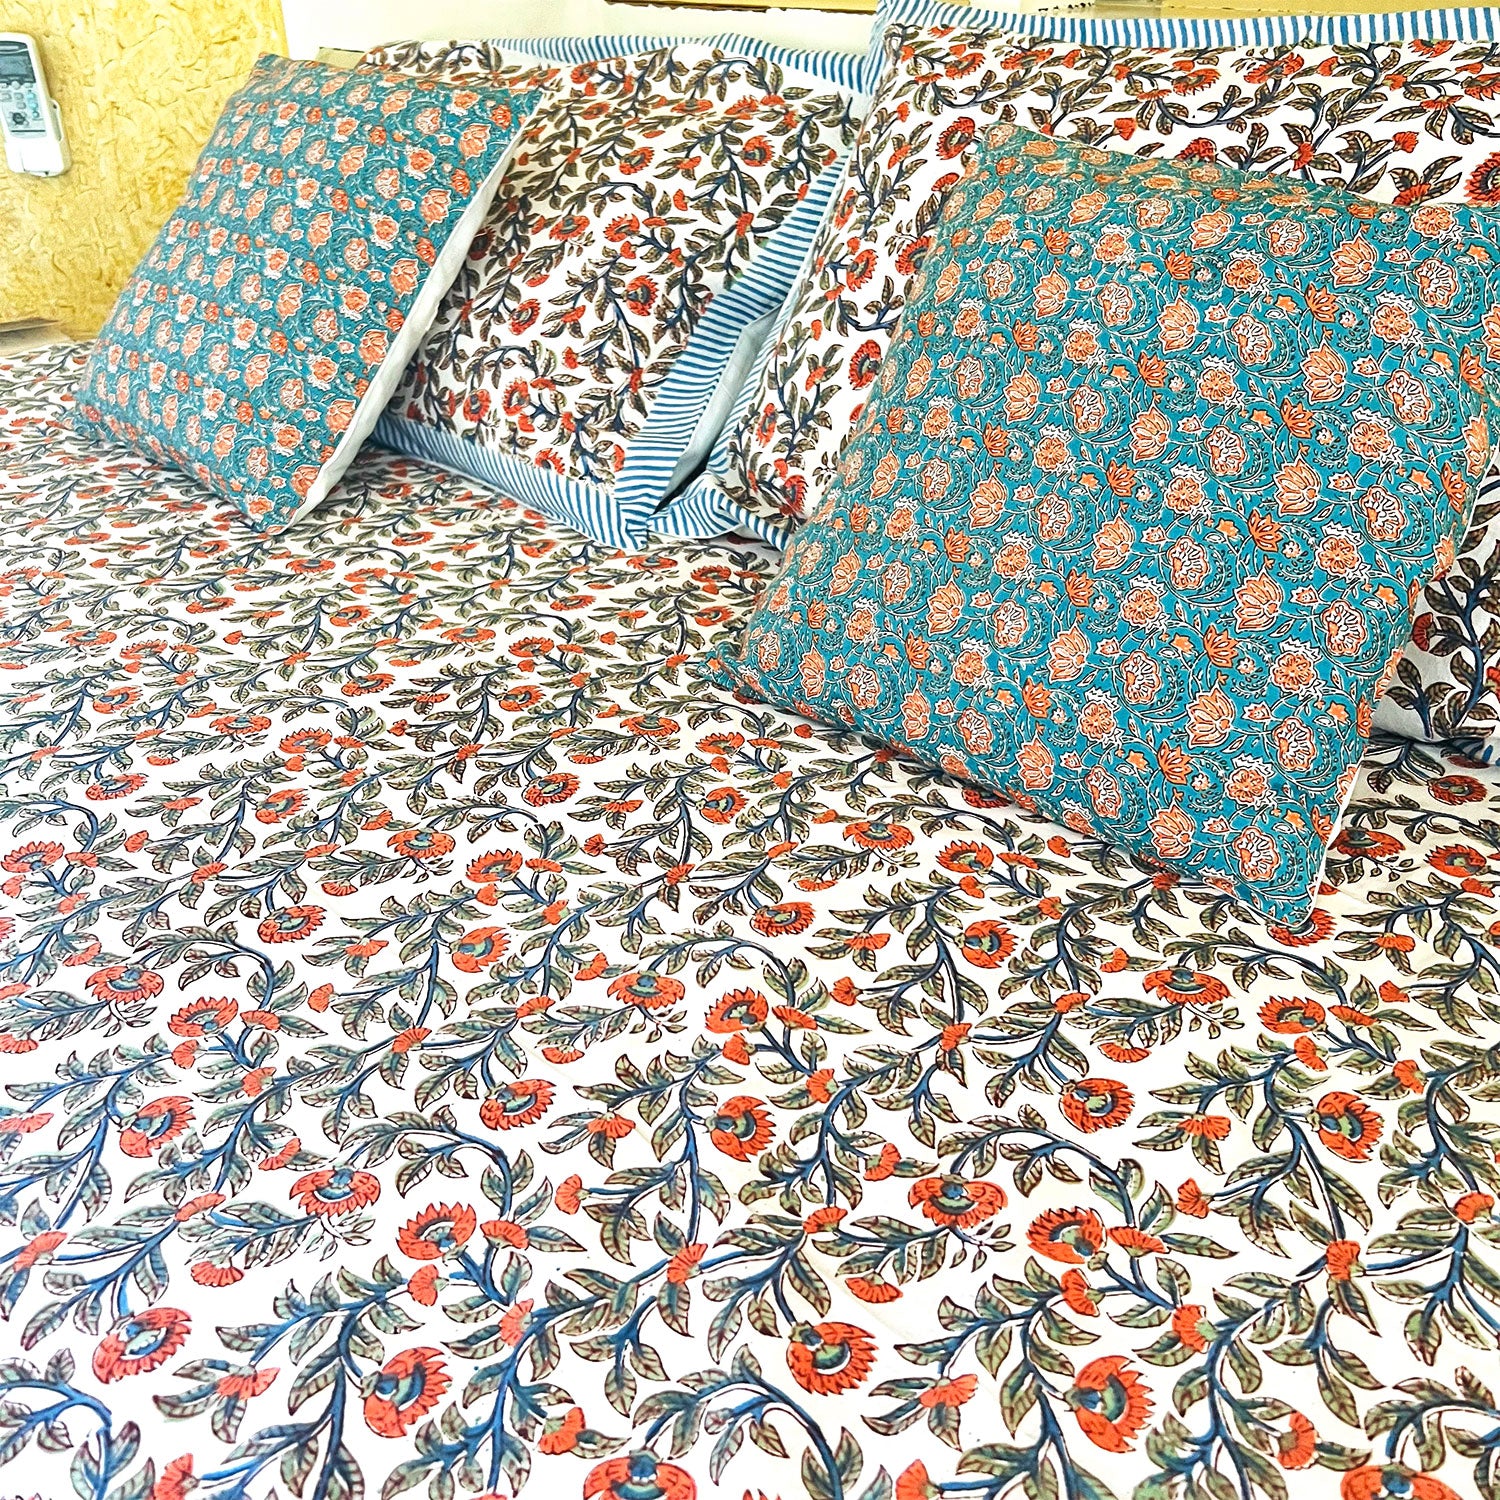 Jaal Pattern Floral Block Printed Cotton Double Bedsheet Set With 2 Pillow Covers - 108 inches x 108 inches